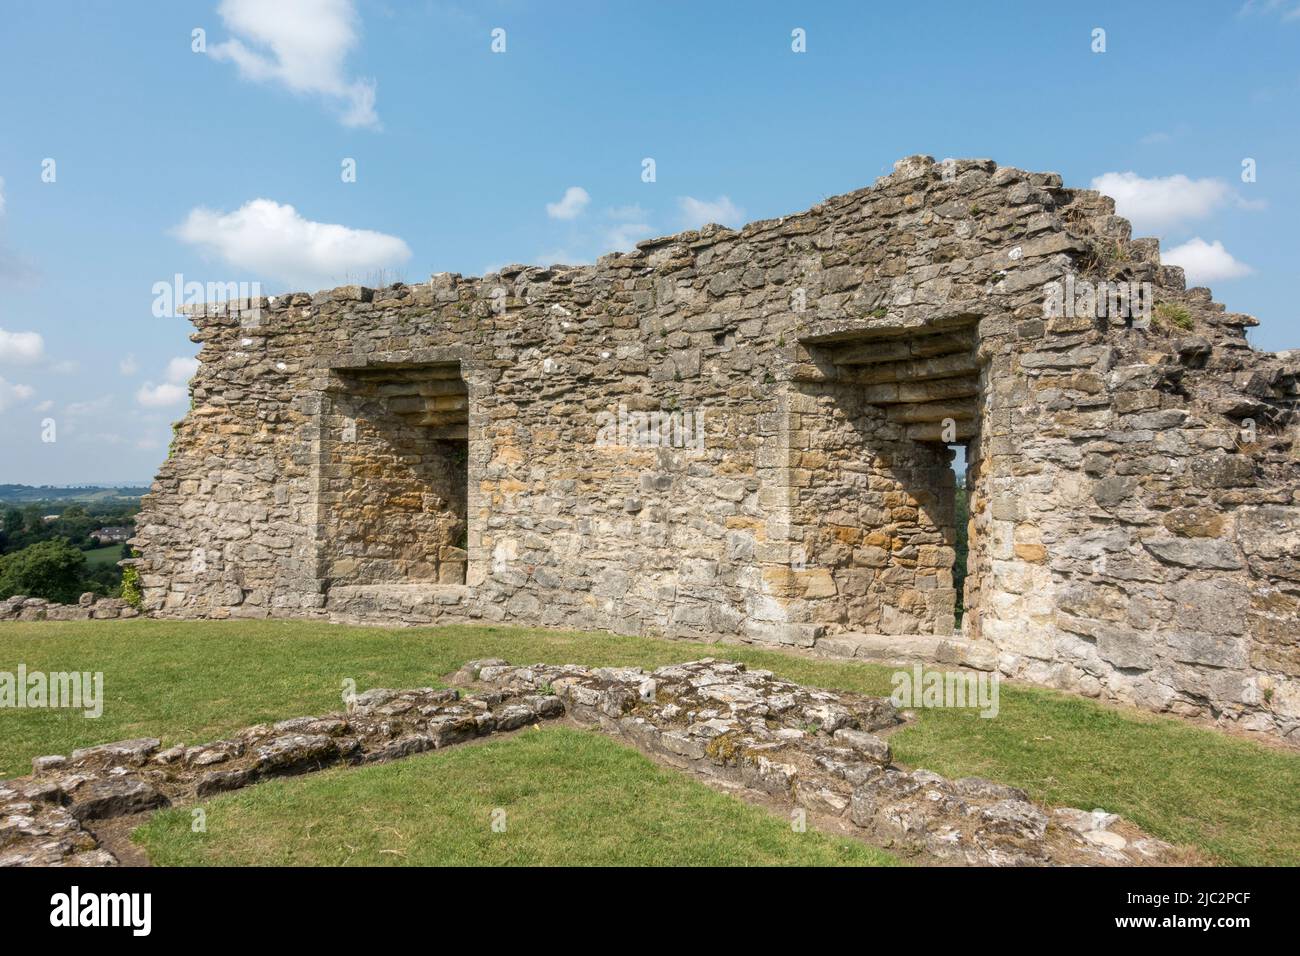 Remaining stonework on top of Kings Tower Keep, Pickering Castle, a motte-and-bailey fortification in Pickering, North Yorkshire, England. Stock Photo